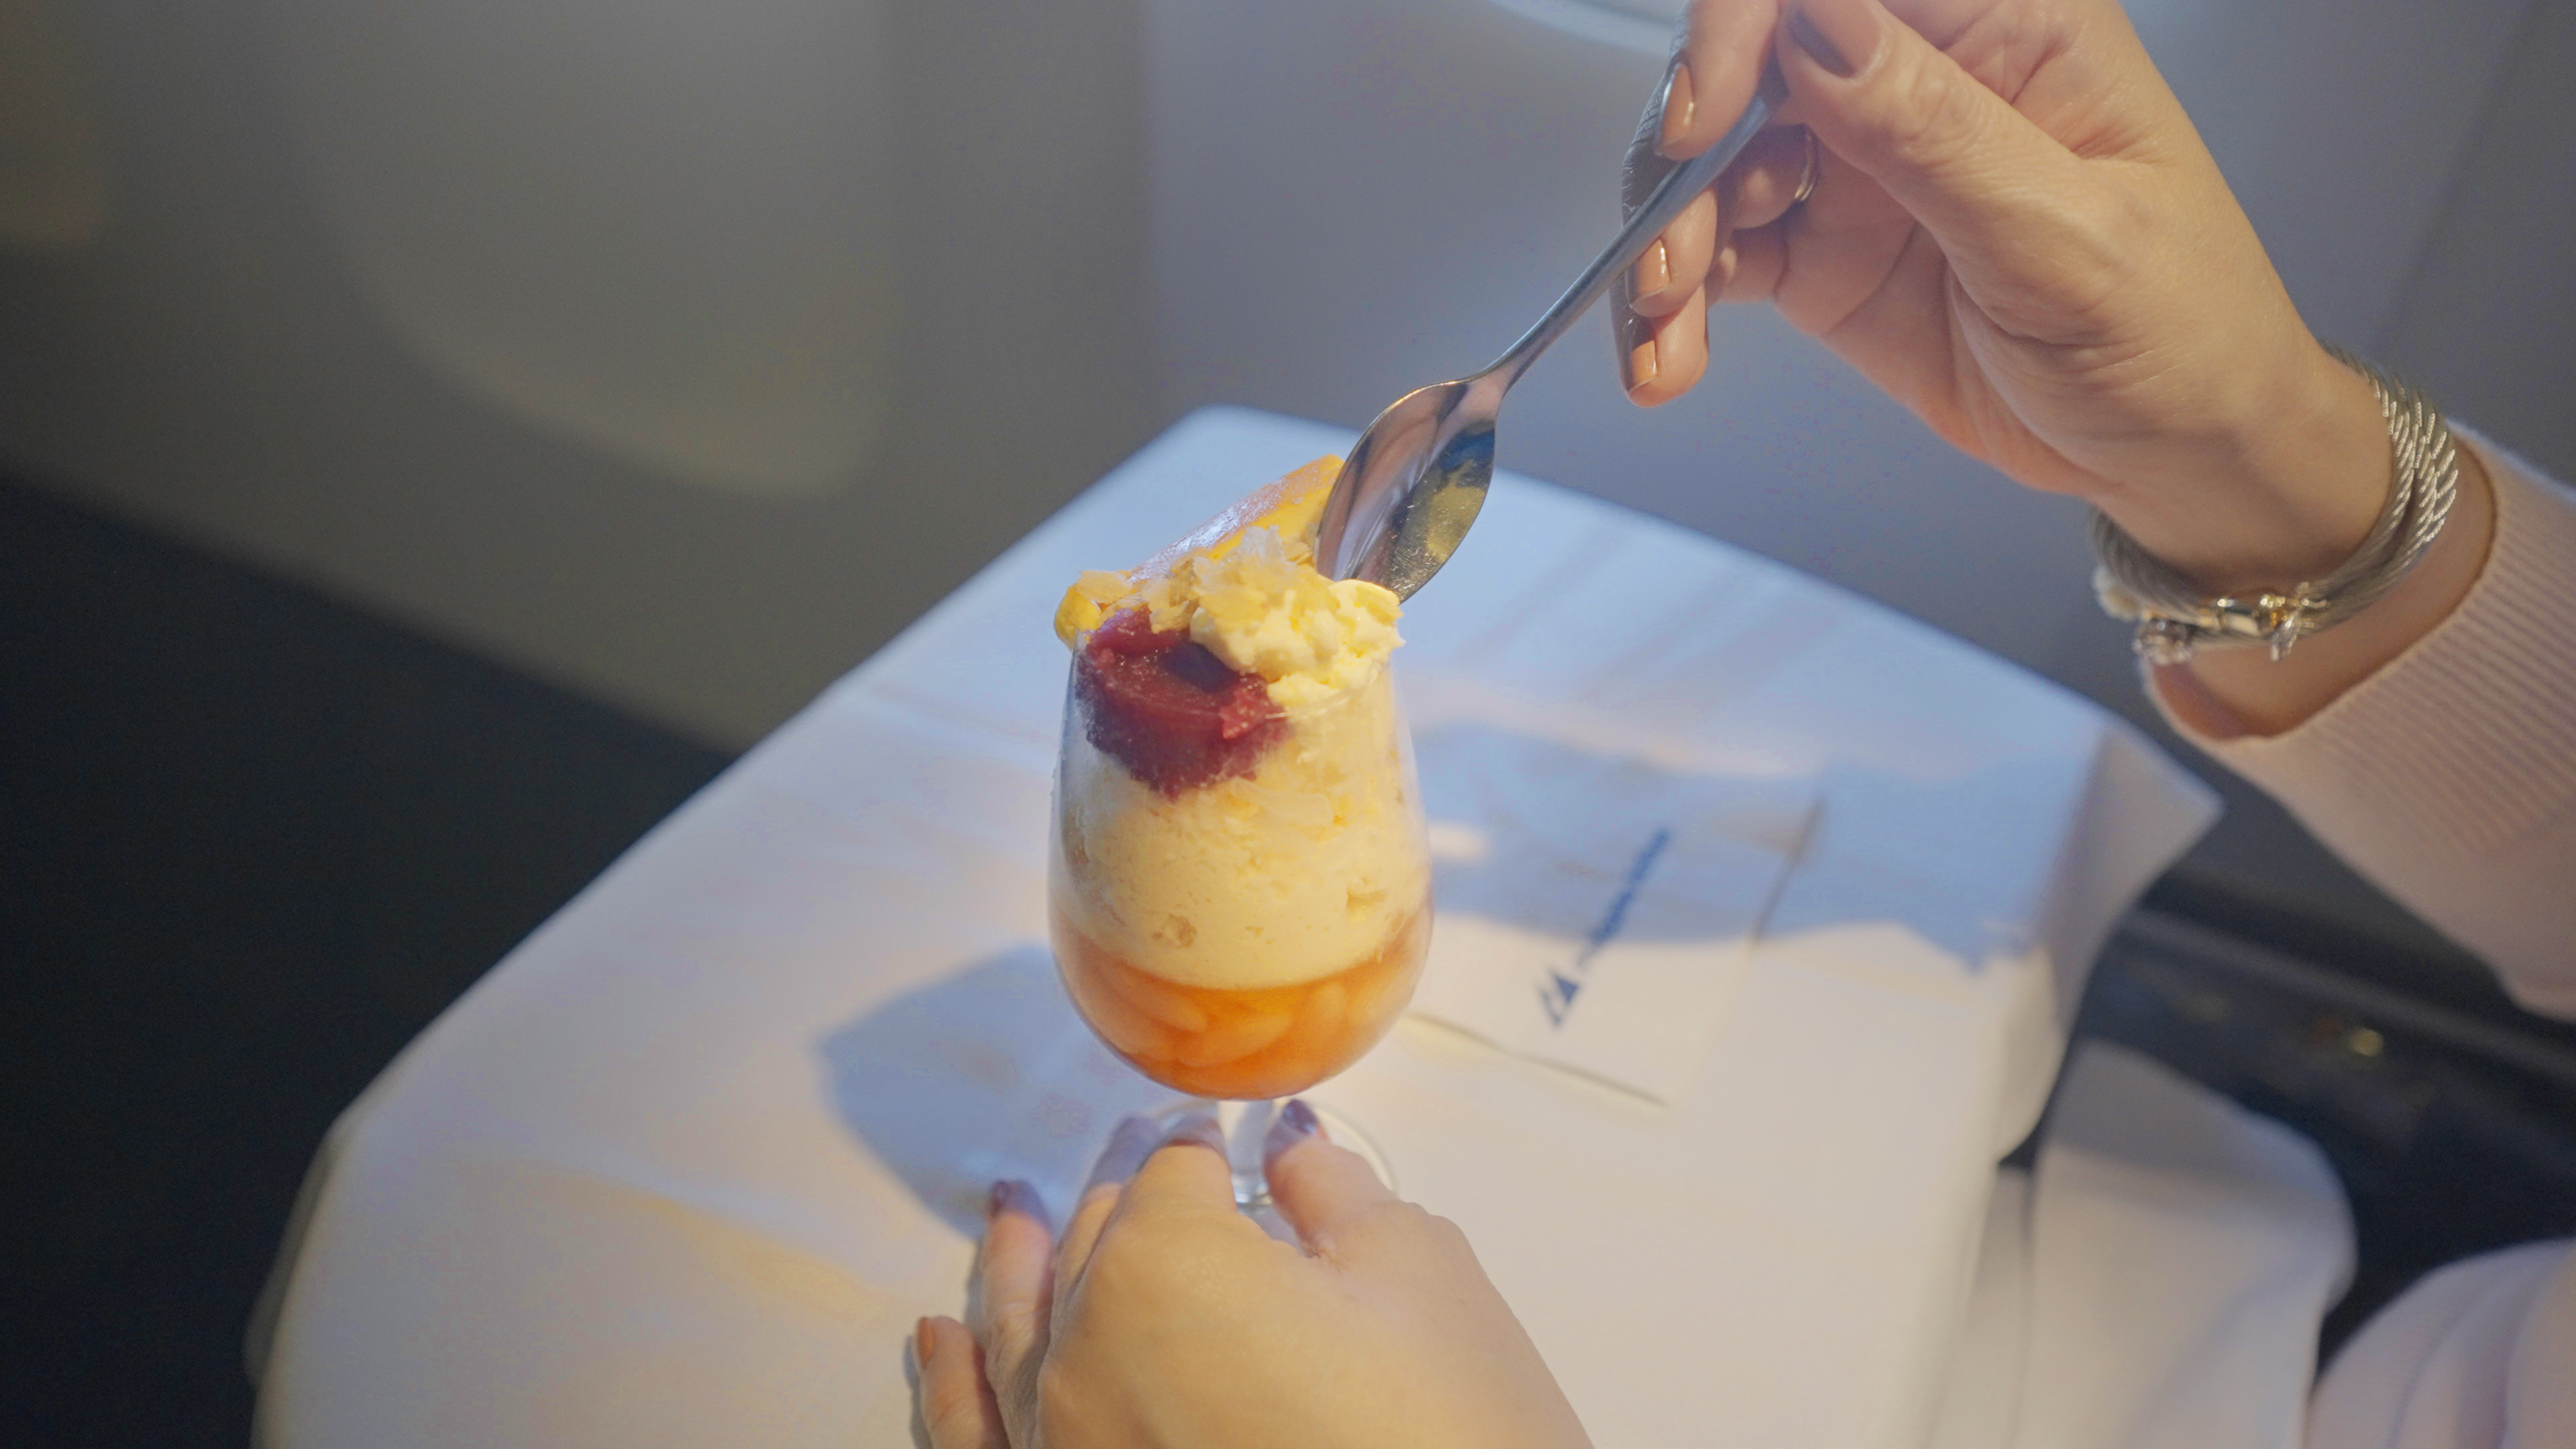 Enjoy your first Halo-Halo in the sky with Philippine Airlines Business Class